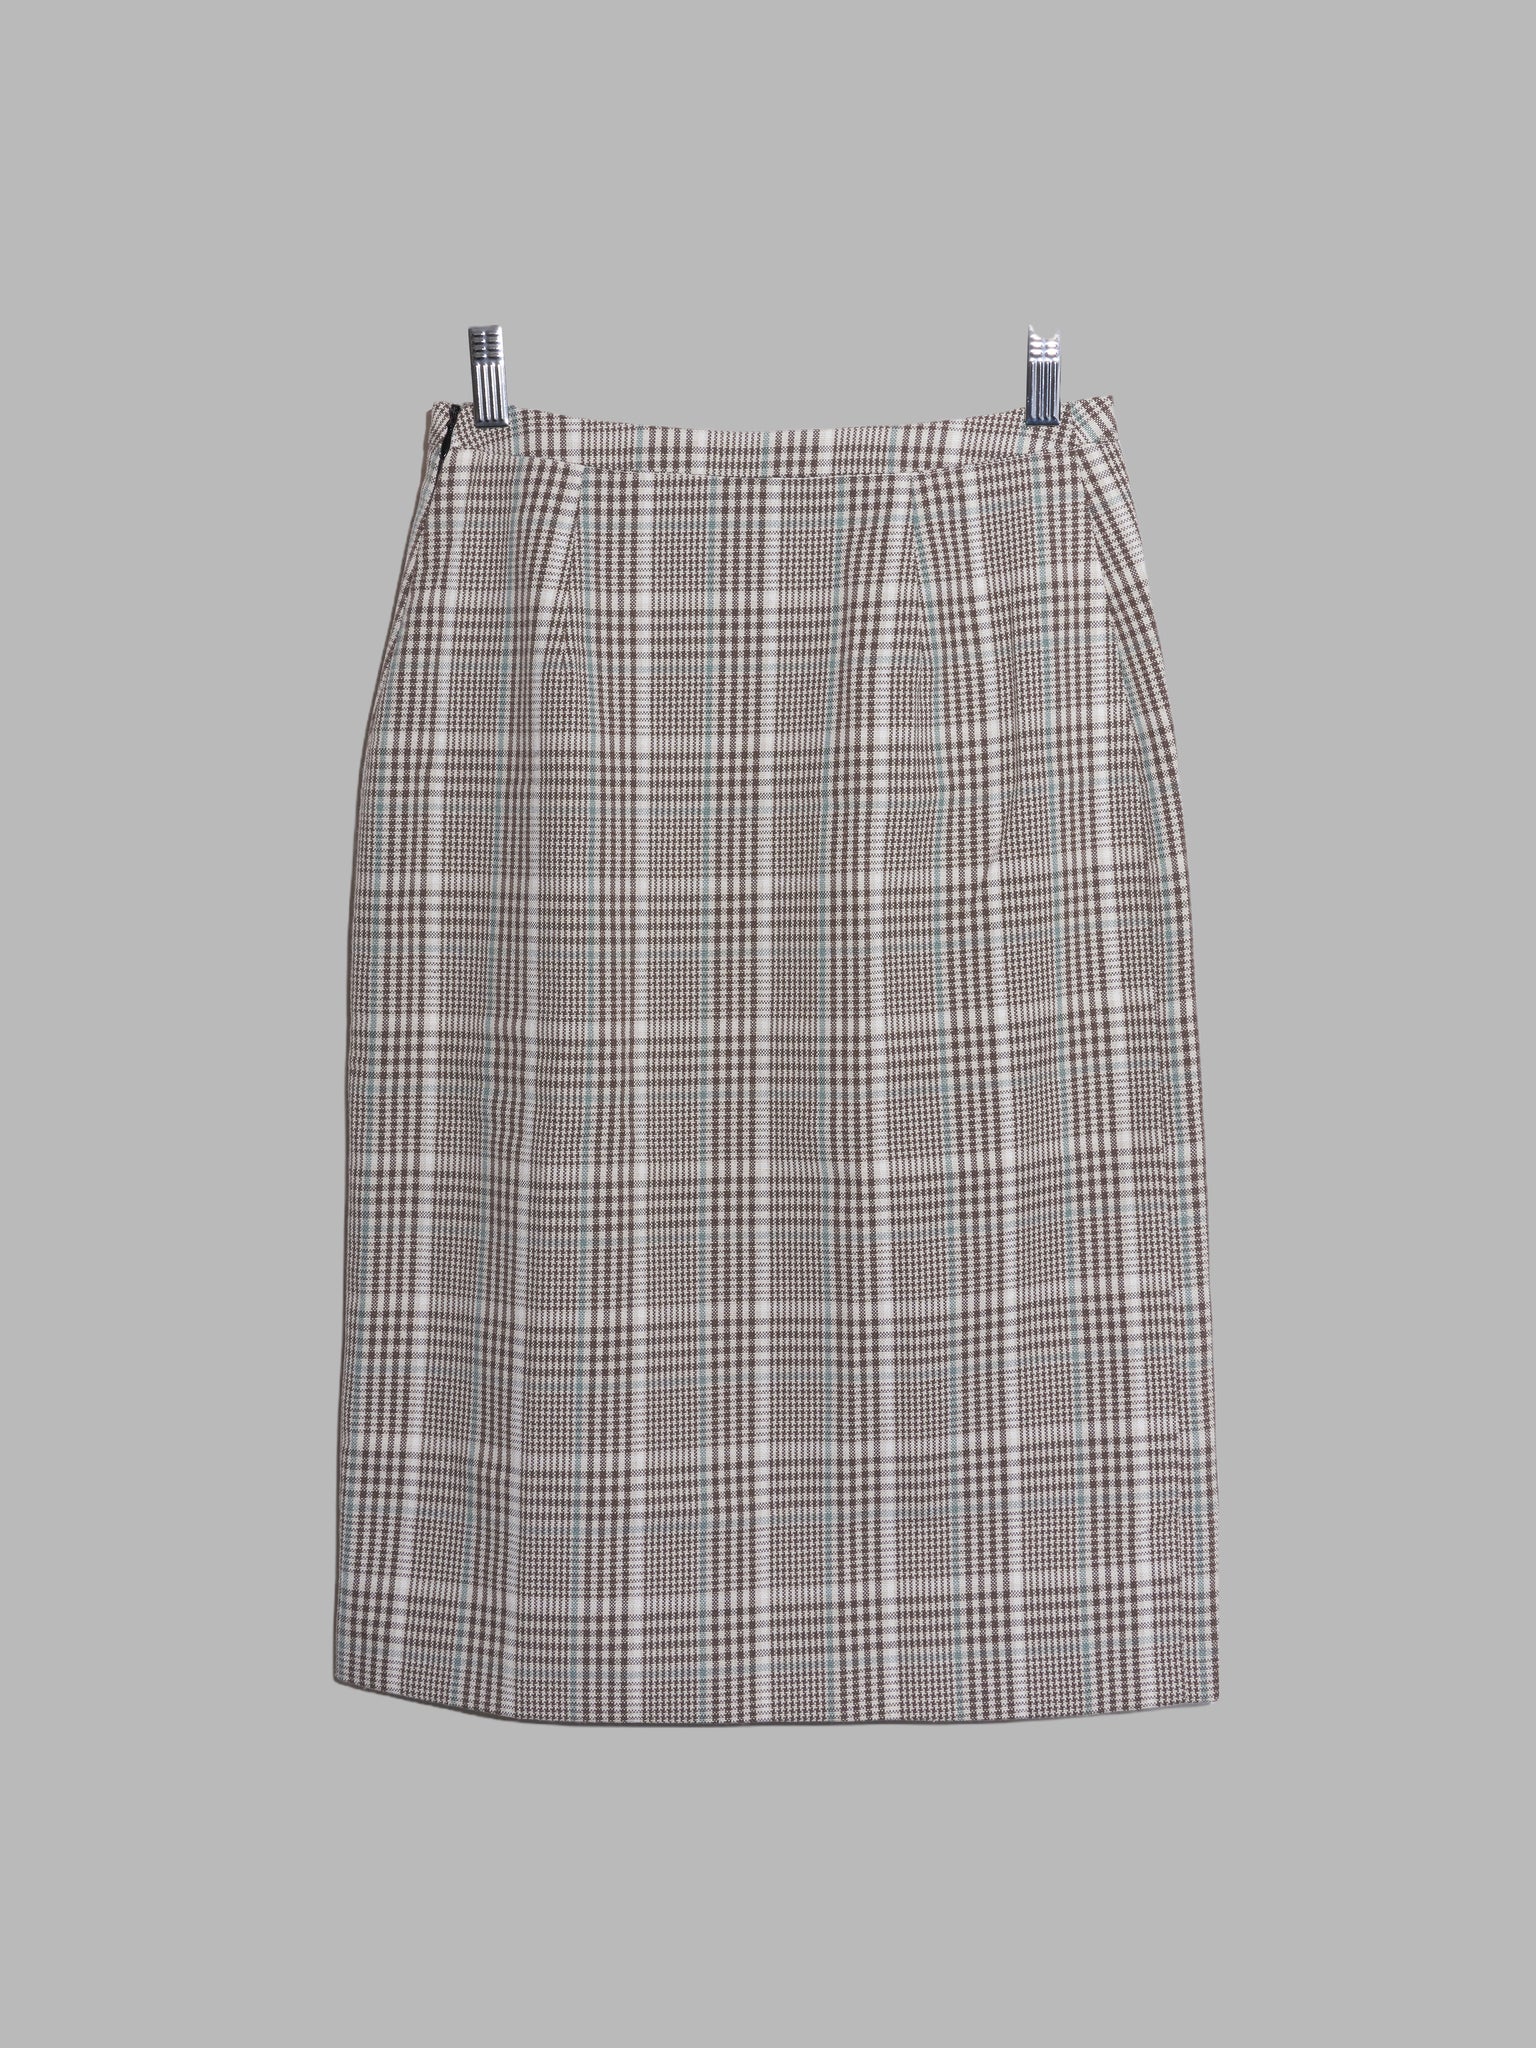 Jean Colonna brown white green poly-cotton check knee length skirt - size S